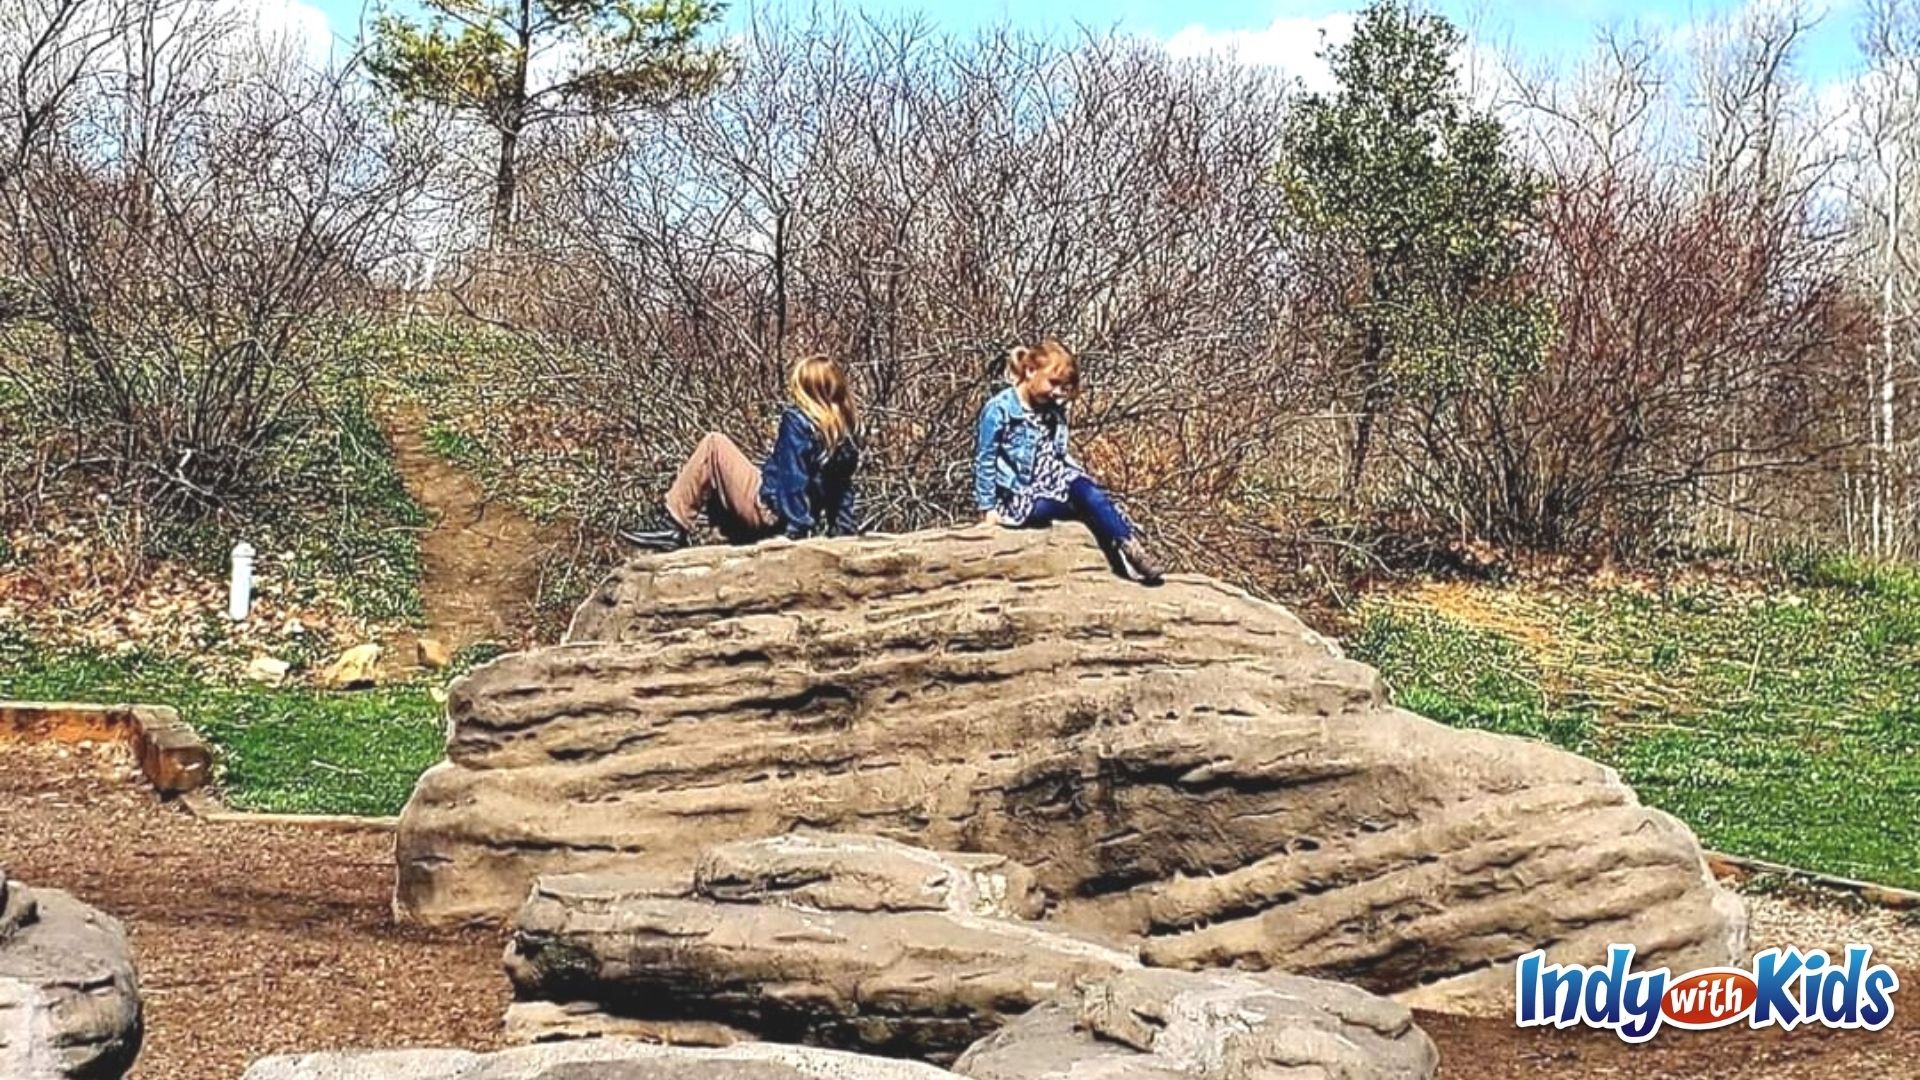 Children climb on rocks at a playground in Fort Harrison State Park.